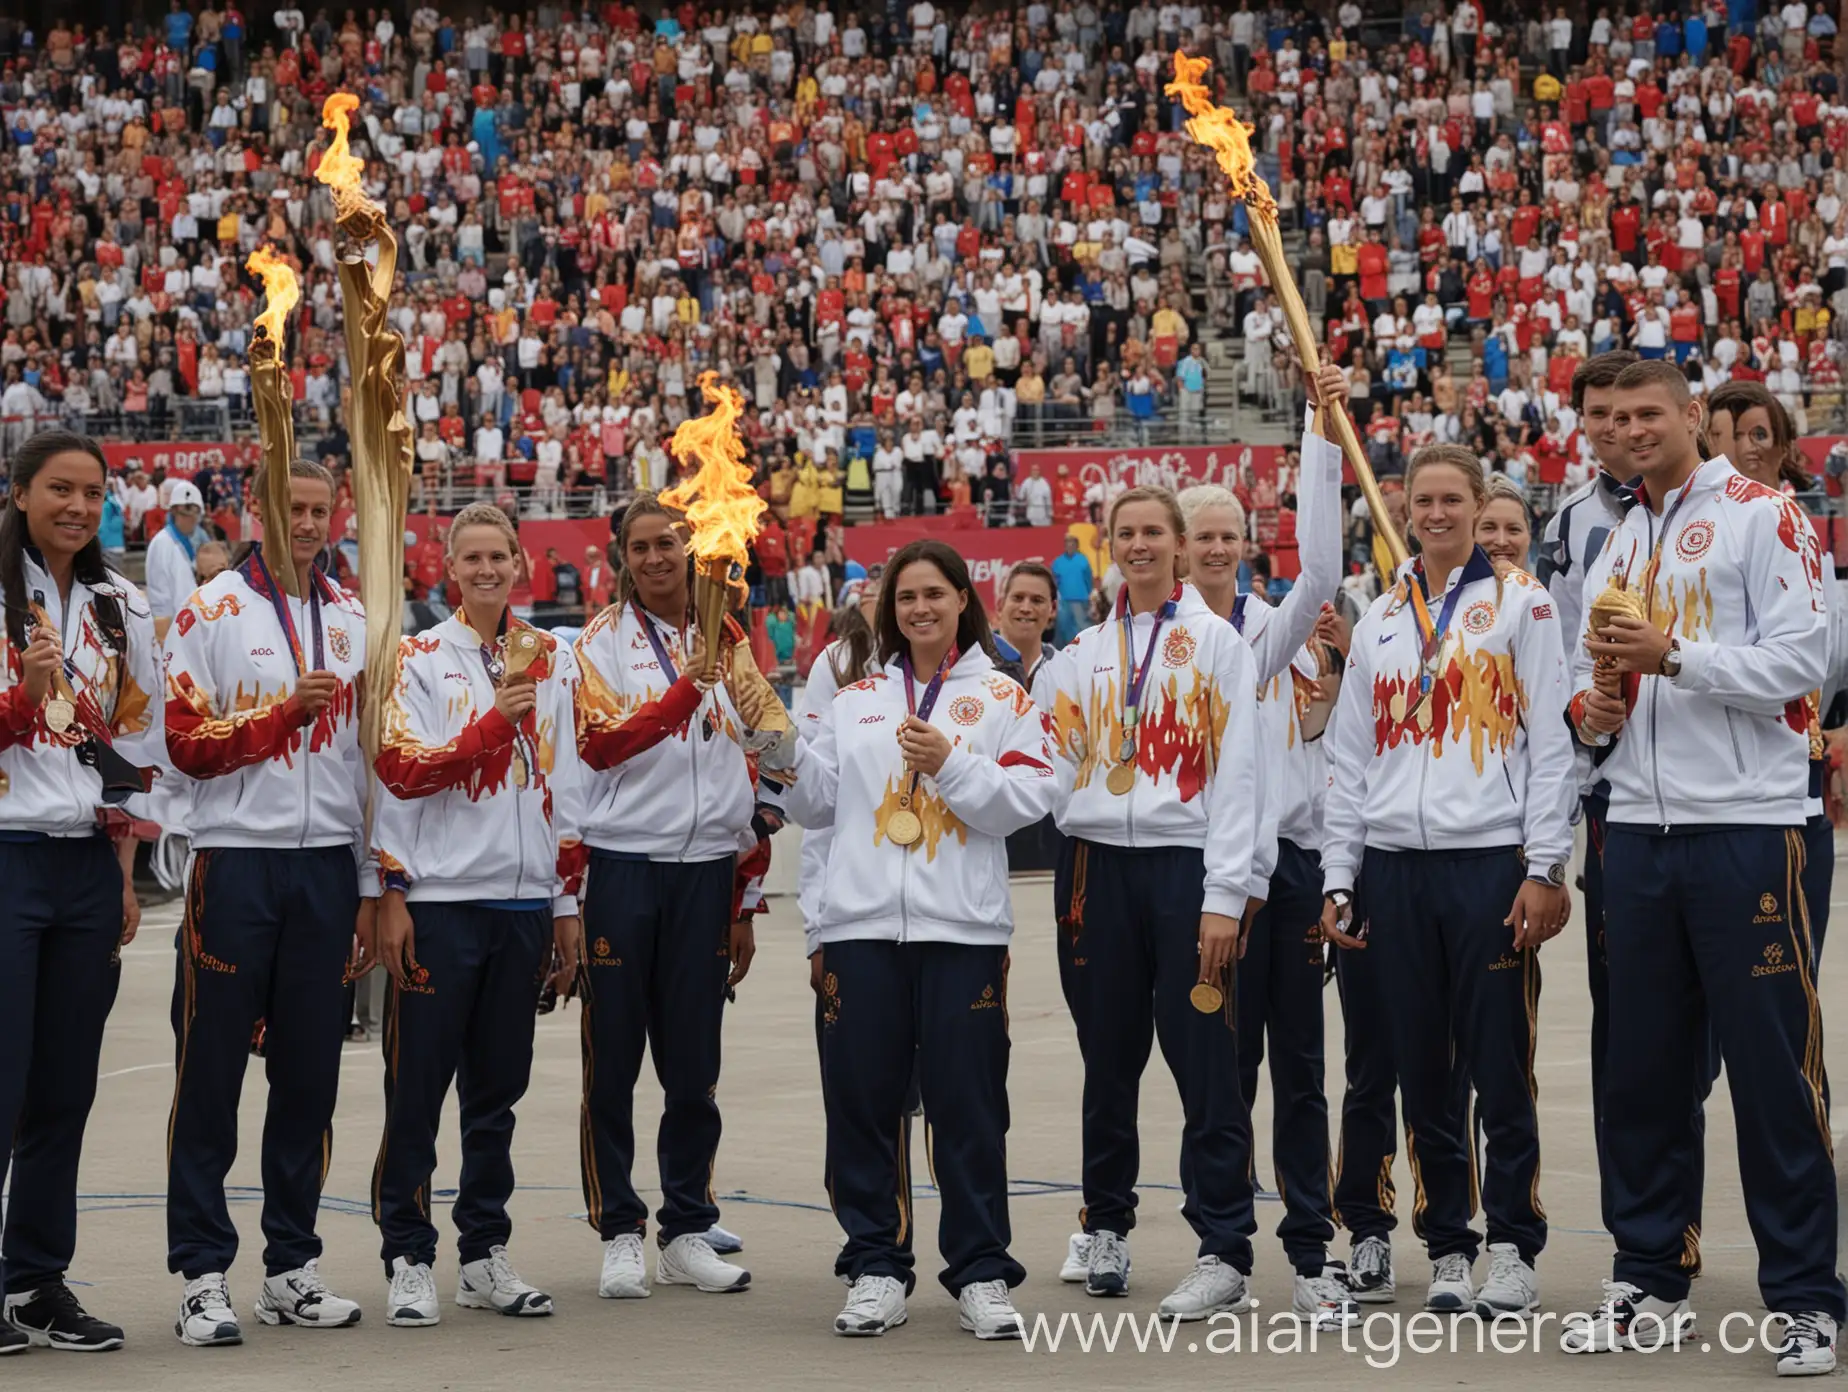 Olympic-Mishka-Holding-Flame-and-Medals-Surrounded-by-Athletes